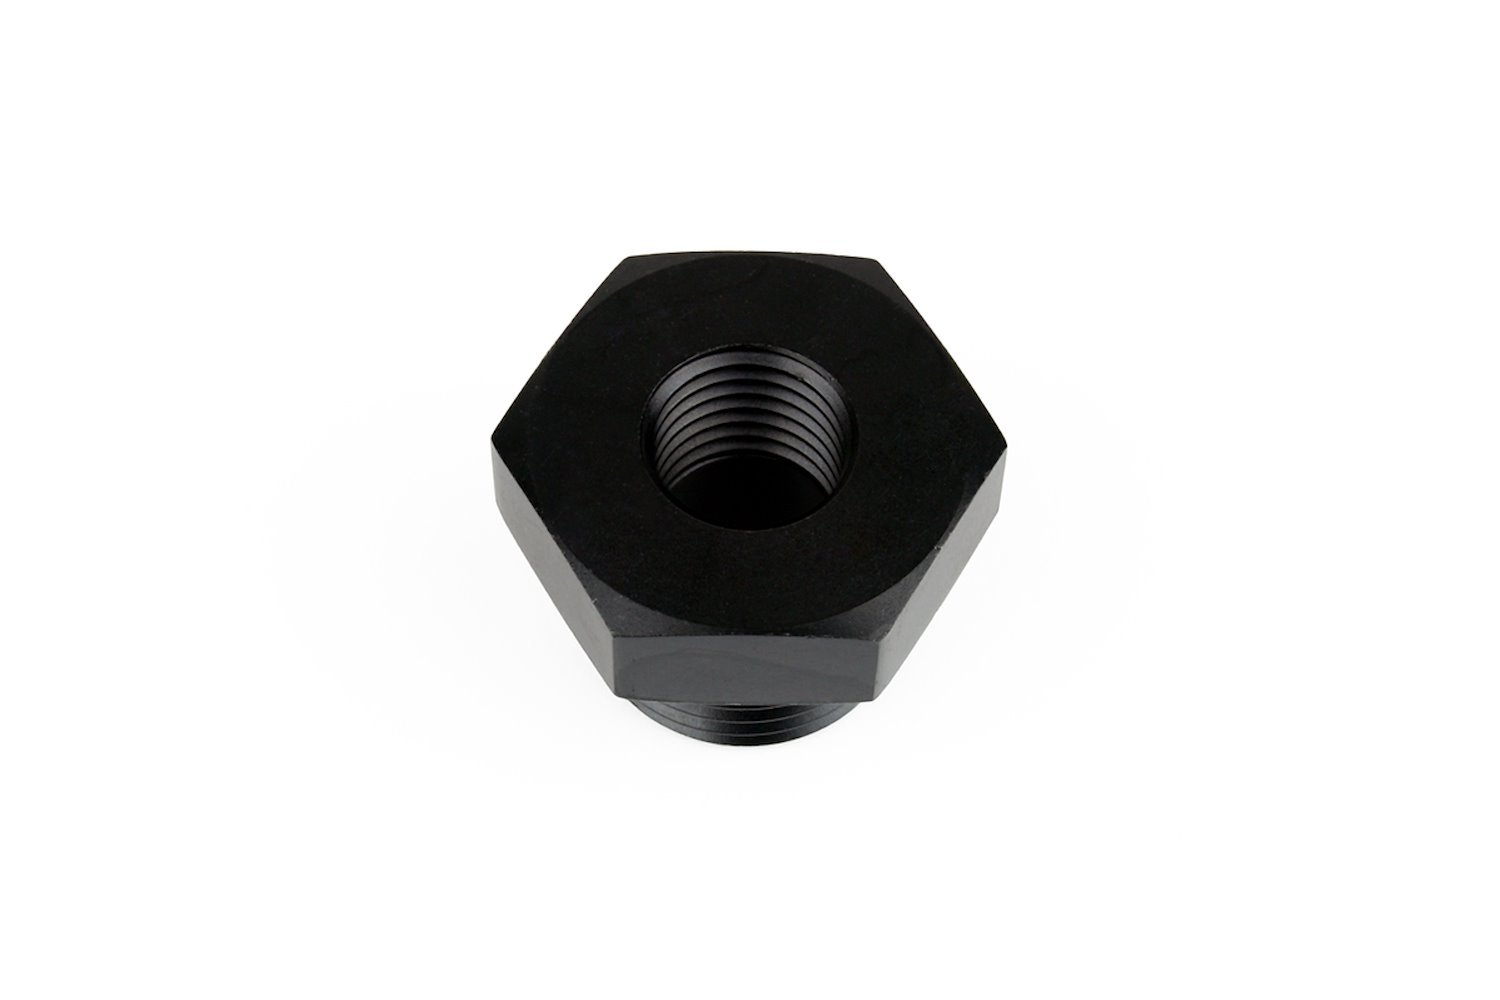 OF-08-M12 RaceFlux Female Sensor Port Adapter Fitting, -8AN O-Ring to M12 x 1.50